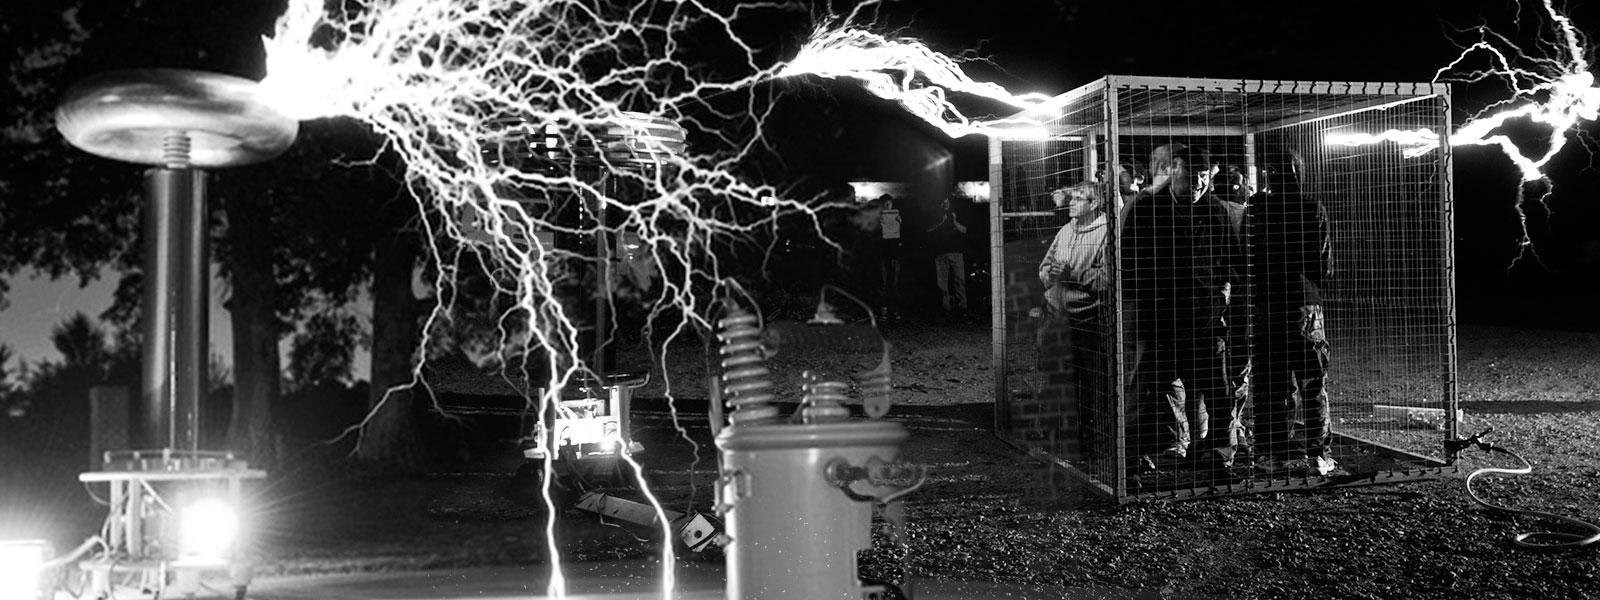 Tesla coils and The Cage of Death